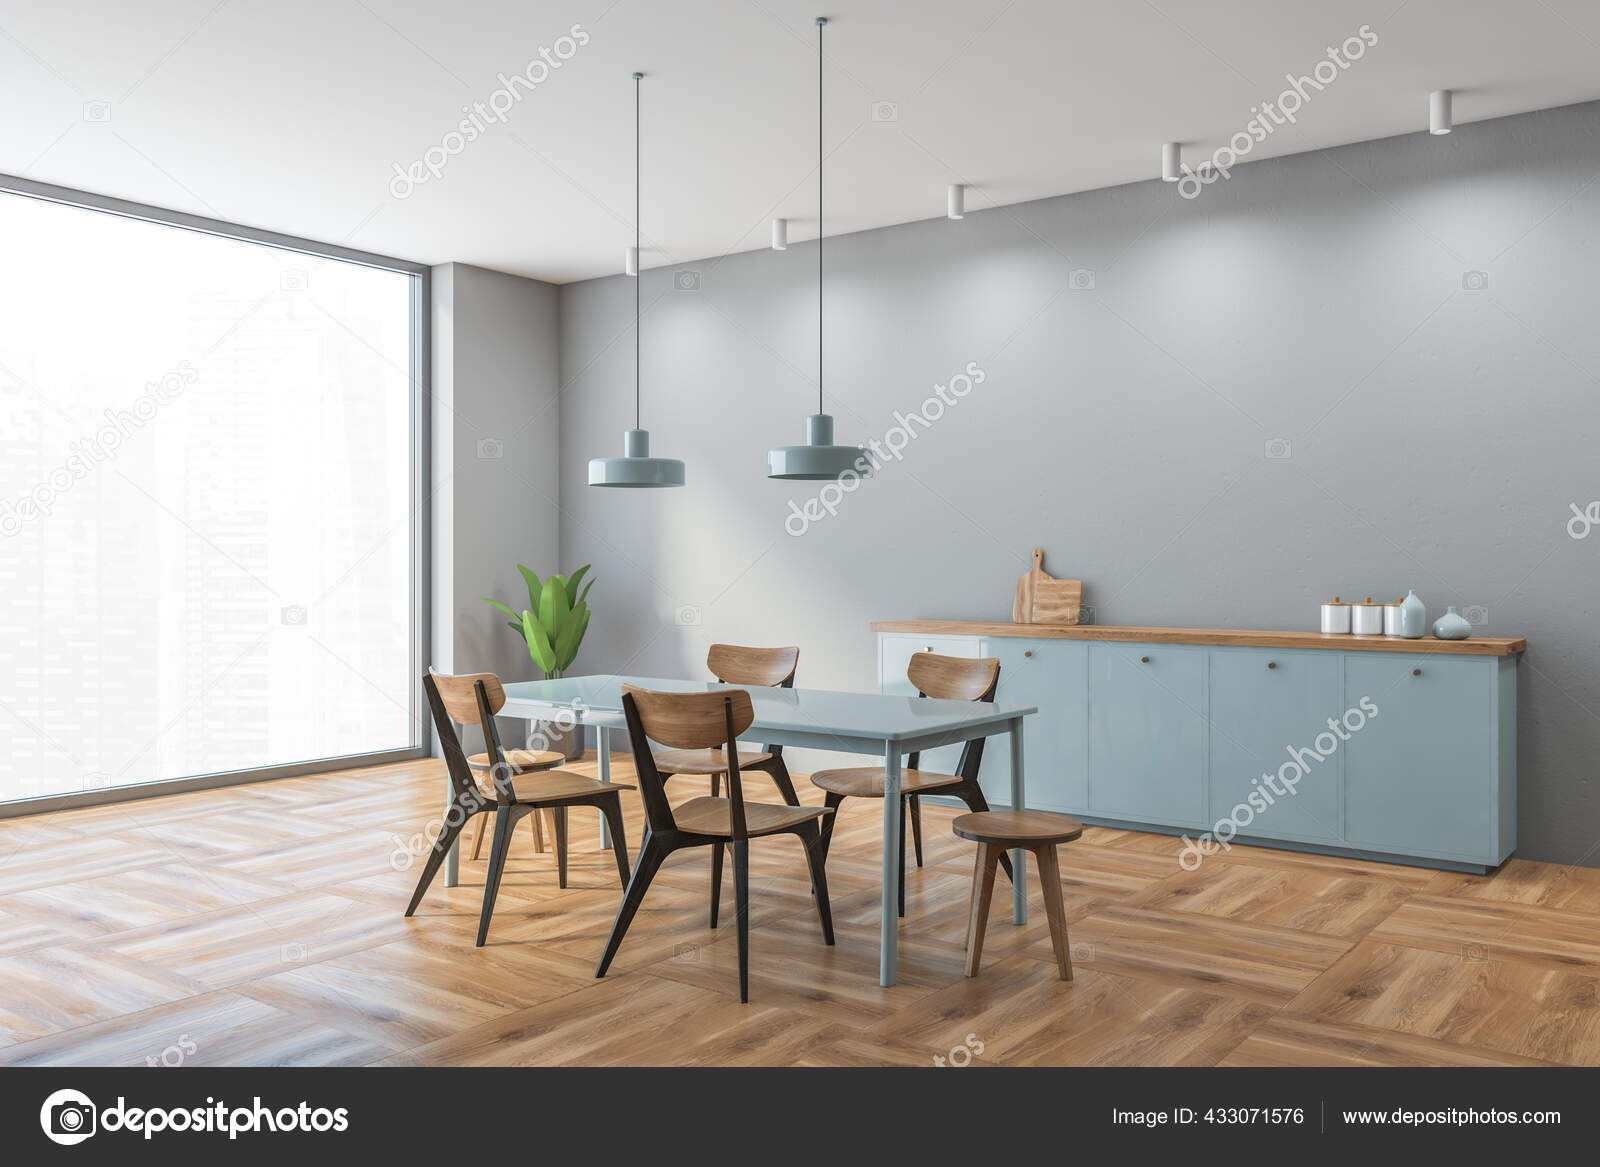 Grey Wooden Dining Room Minimalist, Light Blue Chairs In Dining Room